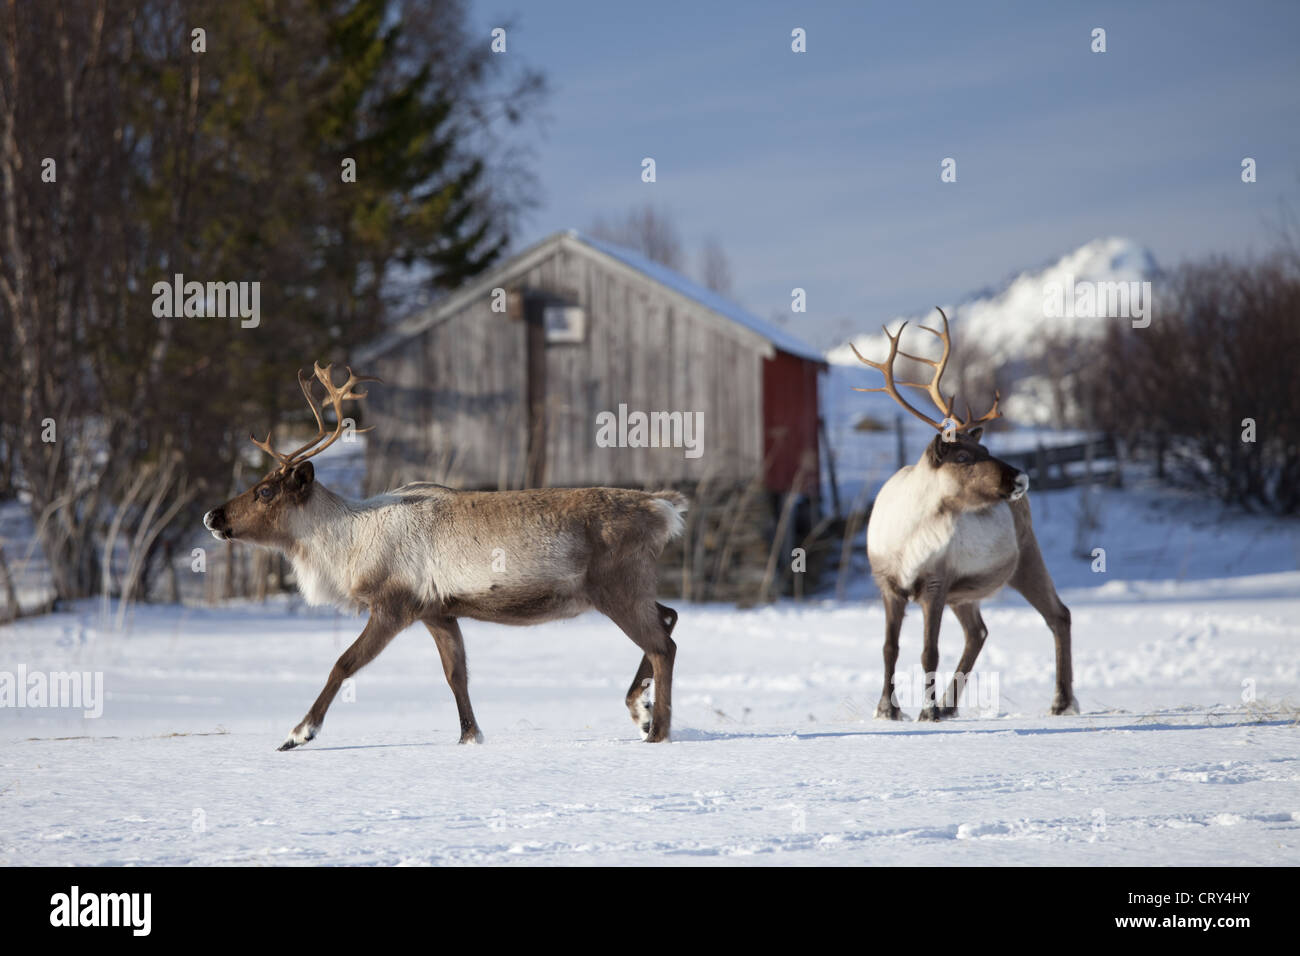 Reindeer herd in the snow in arctic landscape at Kvaløysletta, Kvaloya Island, Tromso in Arctic Circle Northern Norway Stock Photo